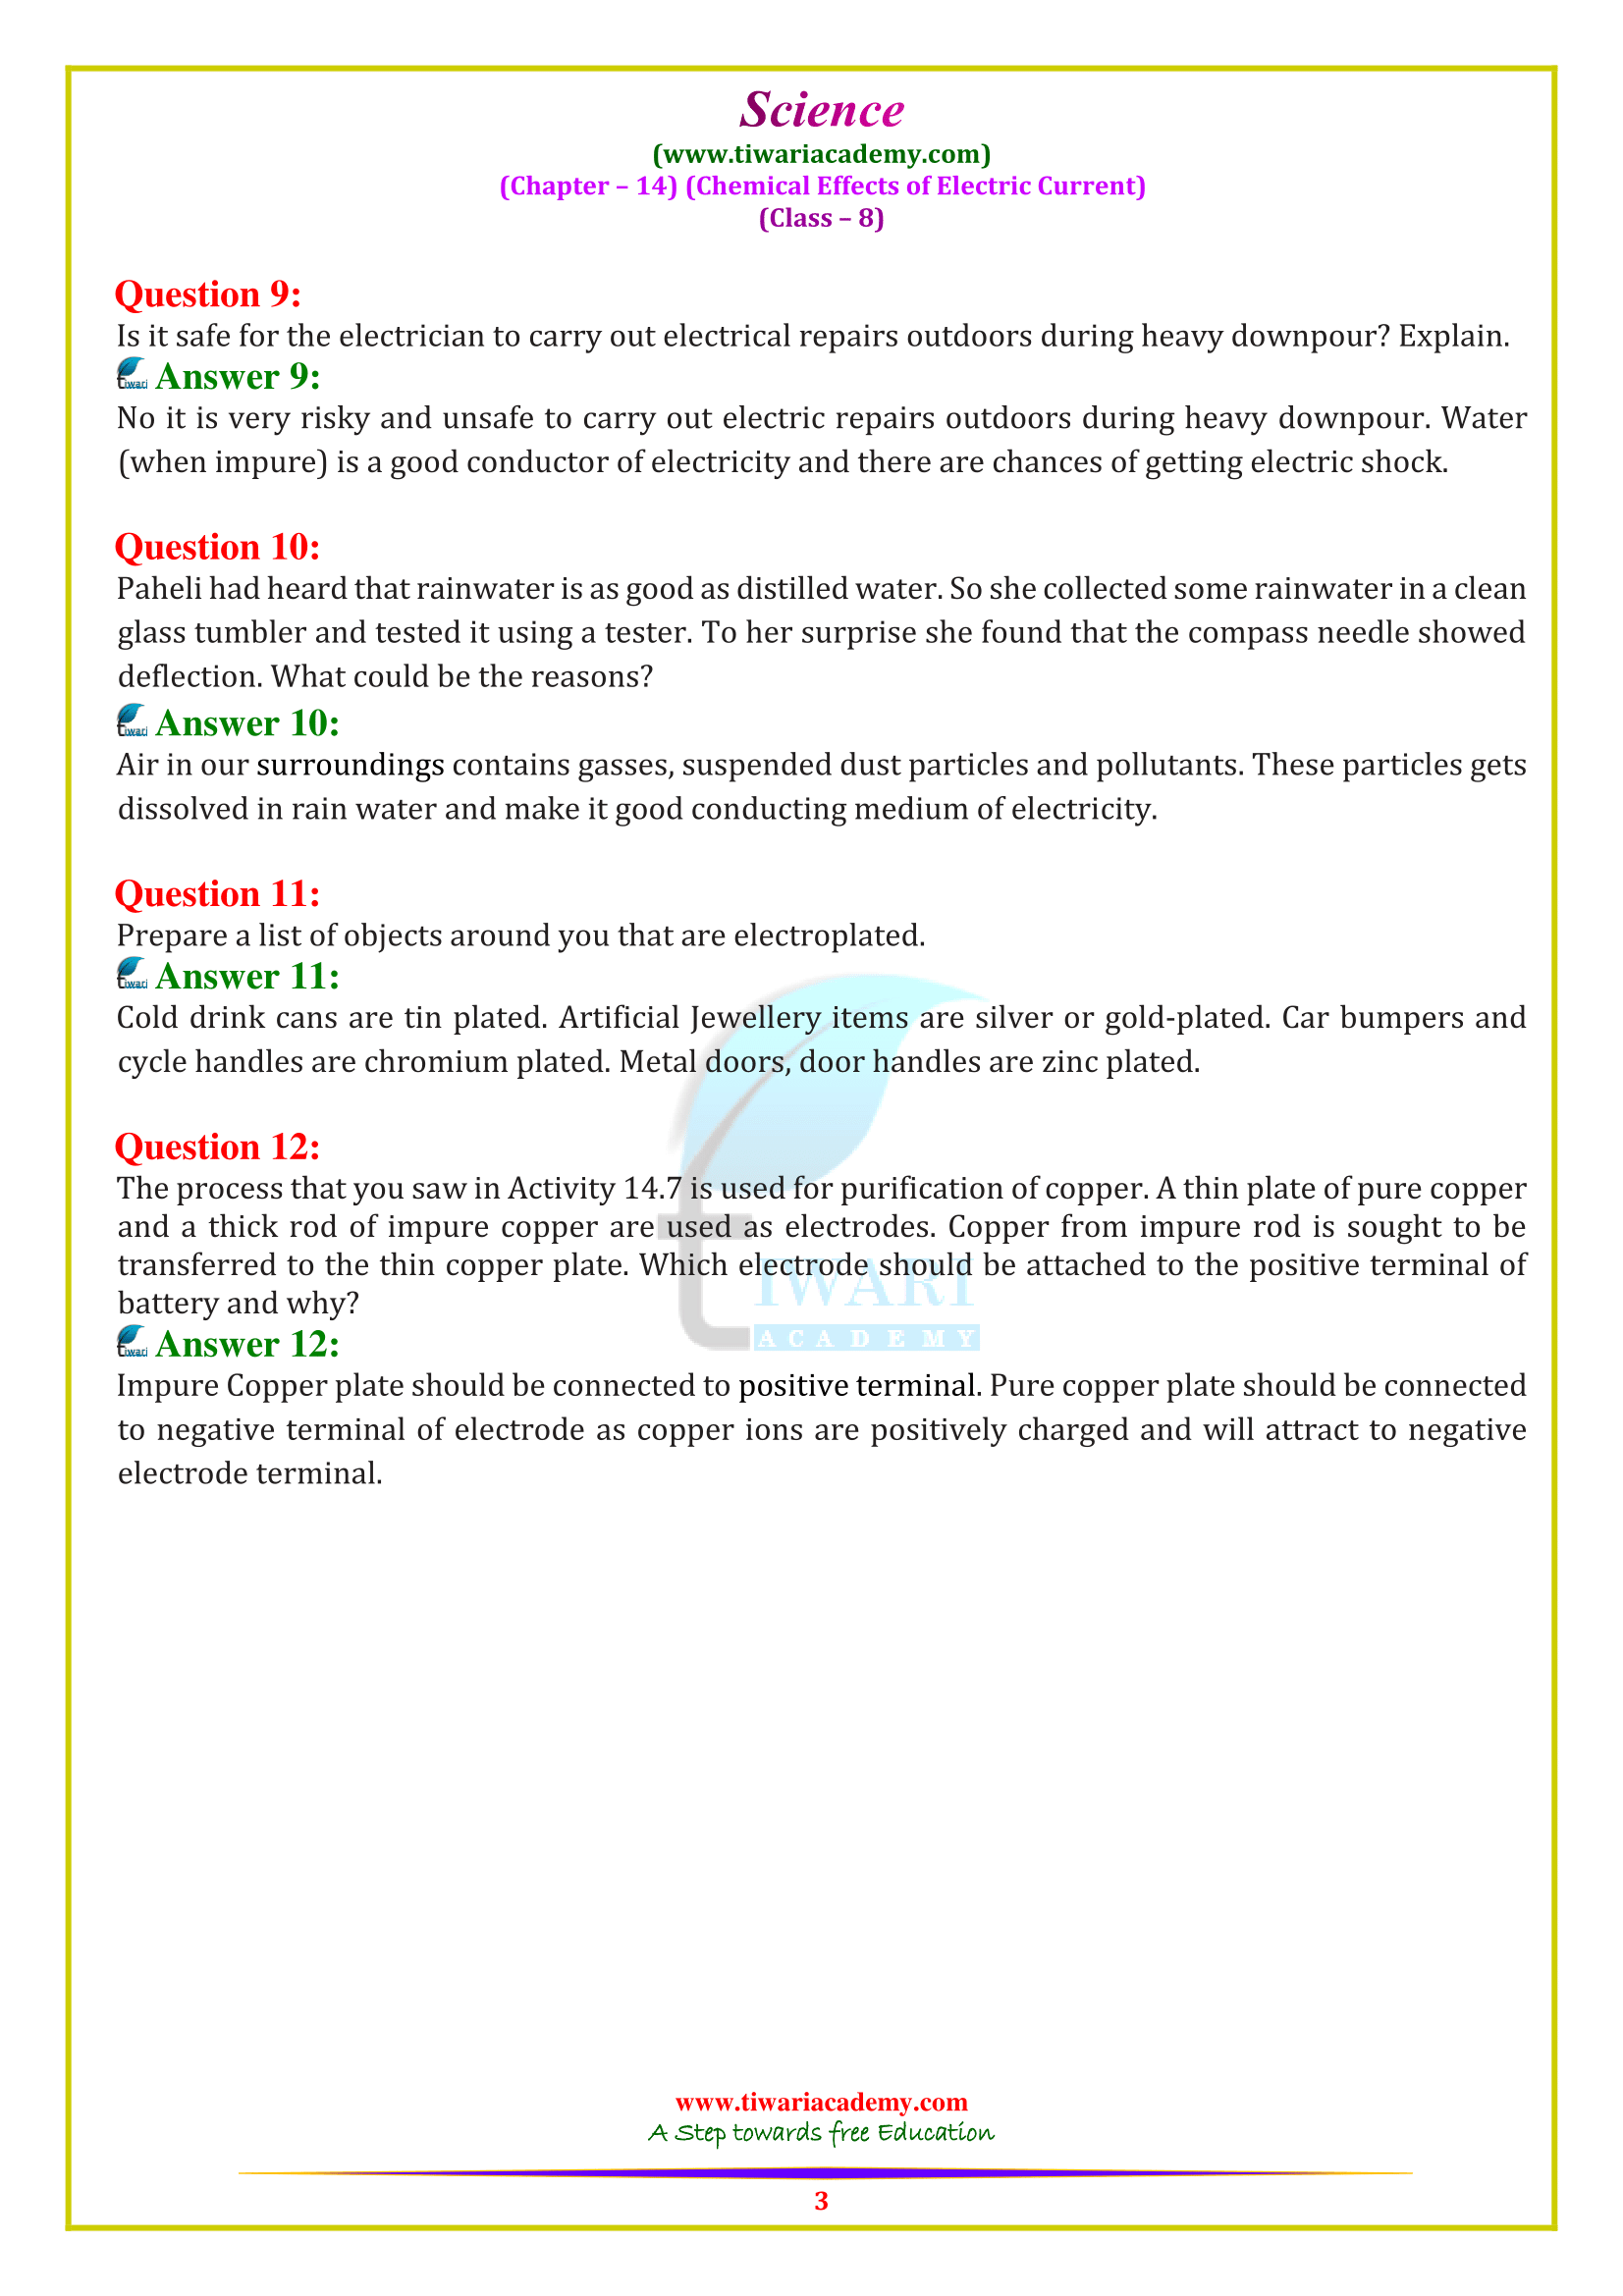 8th science ch. 14 answers